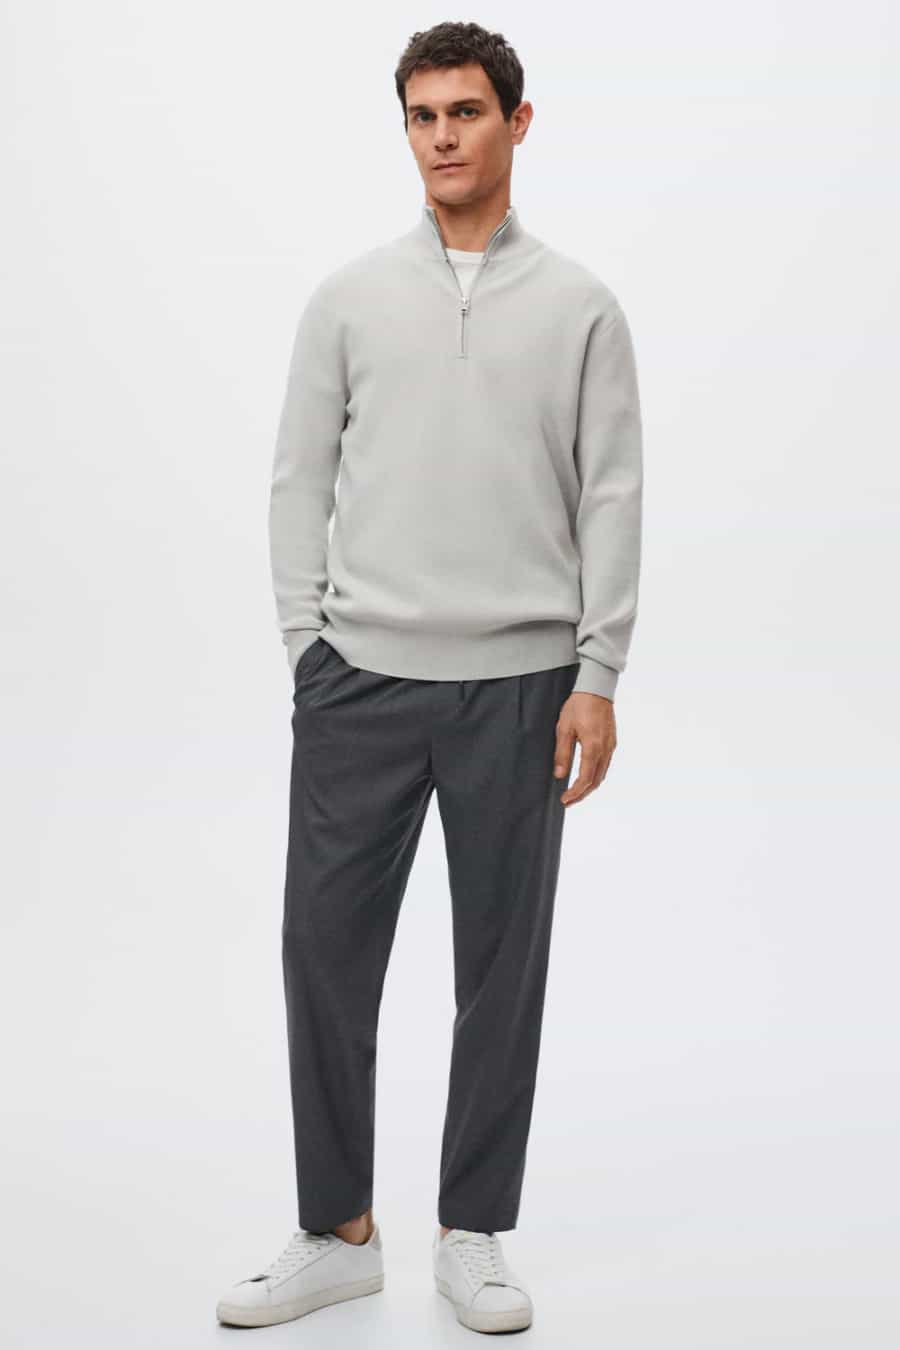 Men's charcoal drawstring pants, grey zip neck sweater and white sneakers outfit